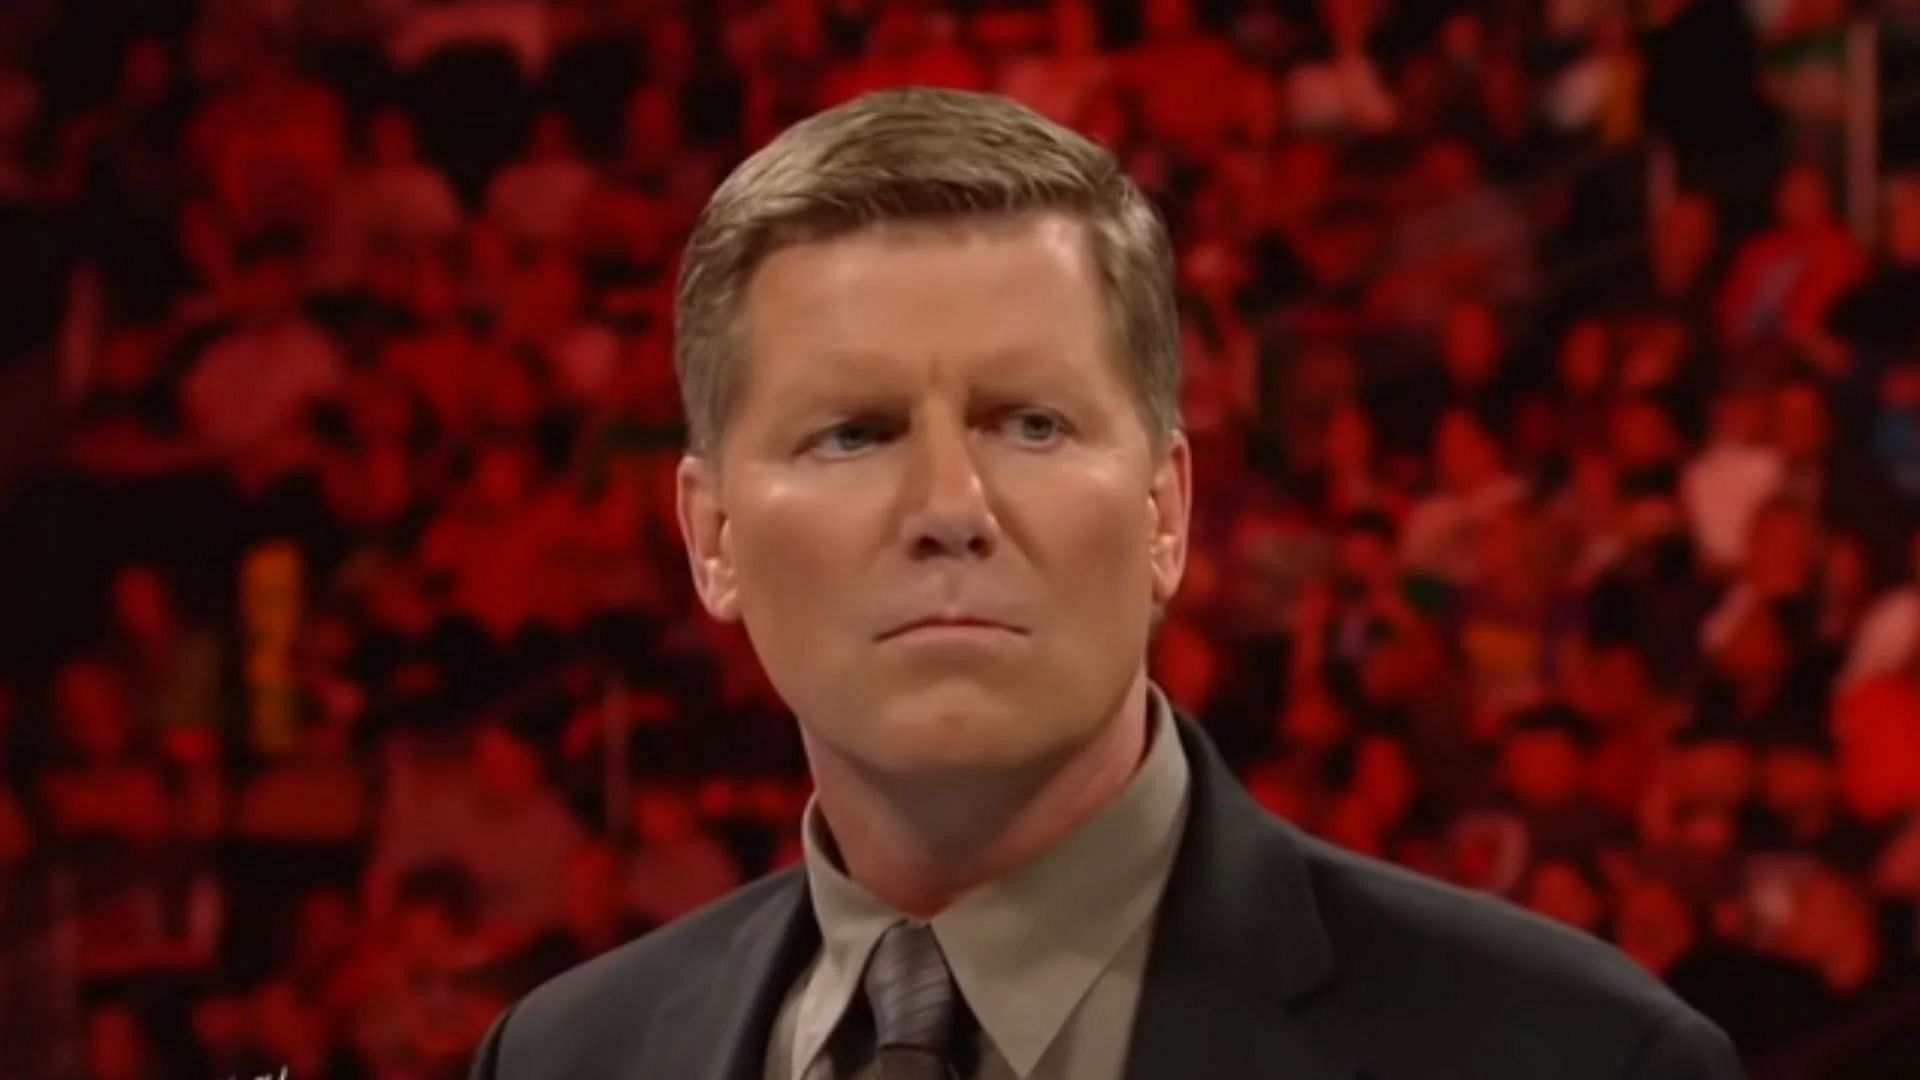 John Laurinaitis fired former Hardcore Champion from WWE in 2005